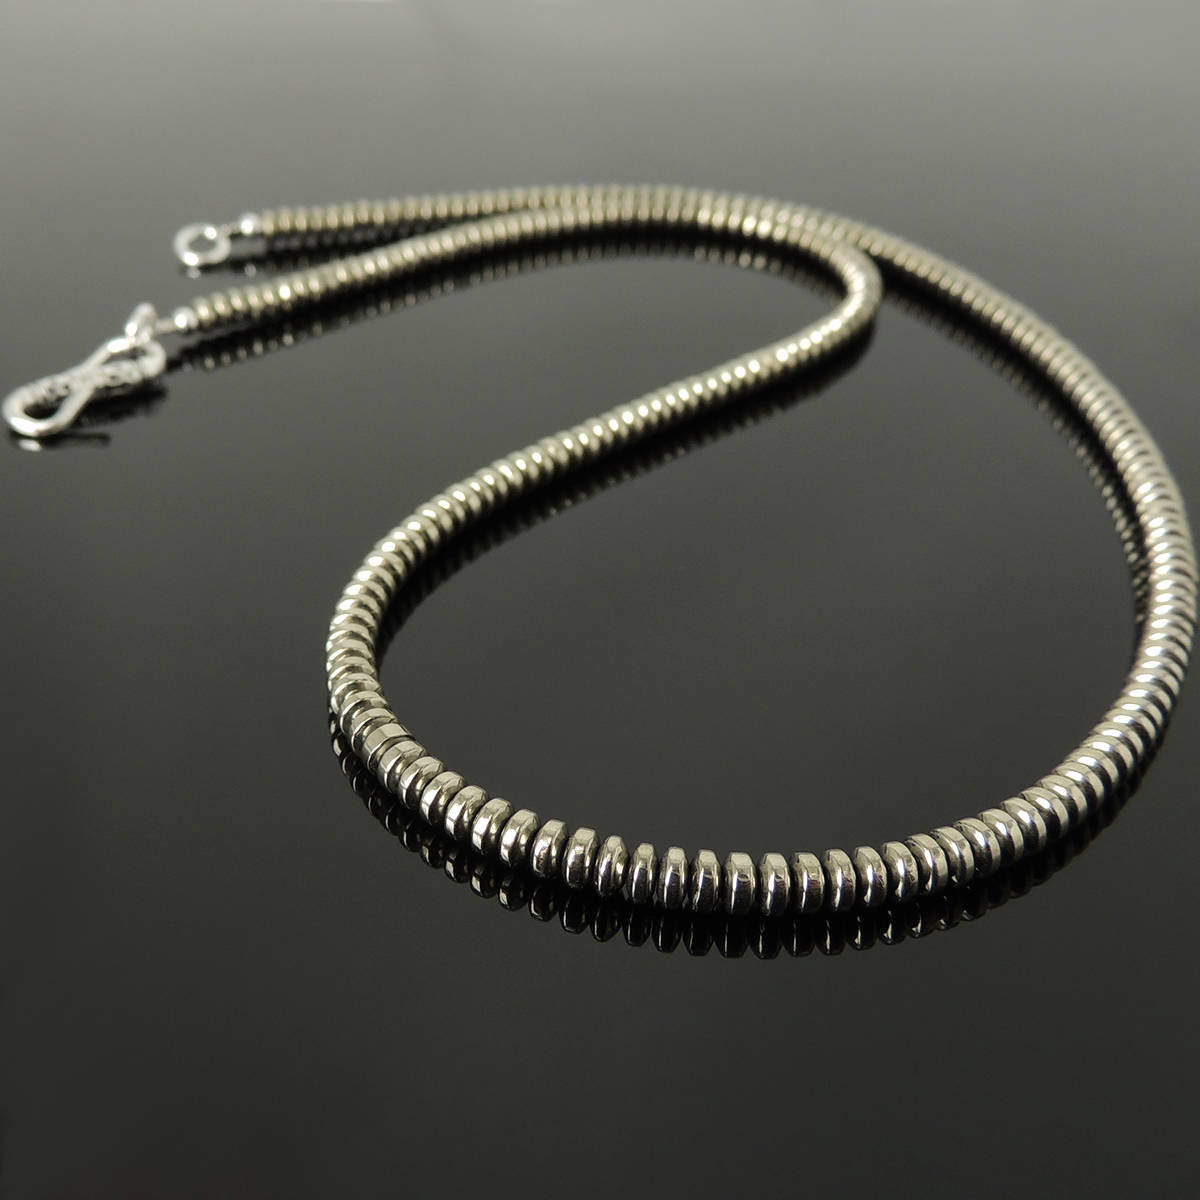 2x4mm Rondel Gold Hematite Healing Gemstone Necklace with S925 Sterling Silver Seamless Beads & S-Hook Clasp - Handmade by Gem & Silver NK191